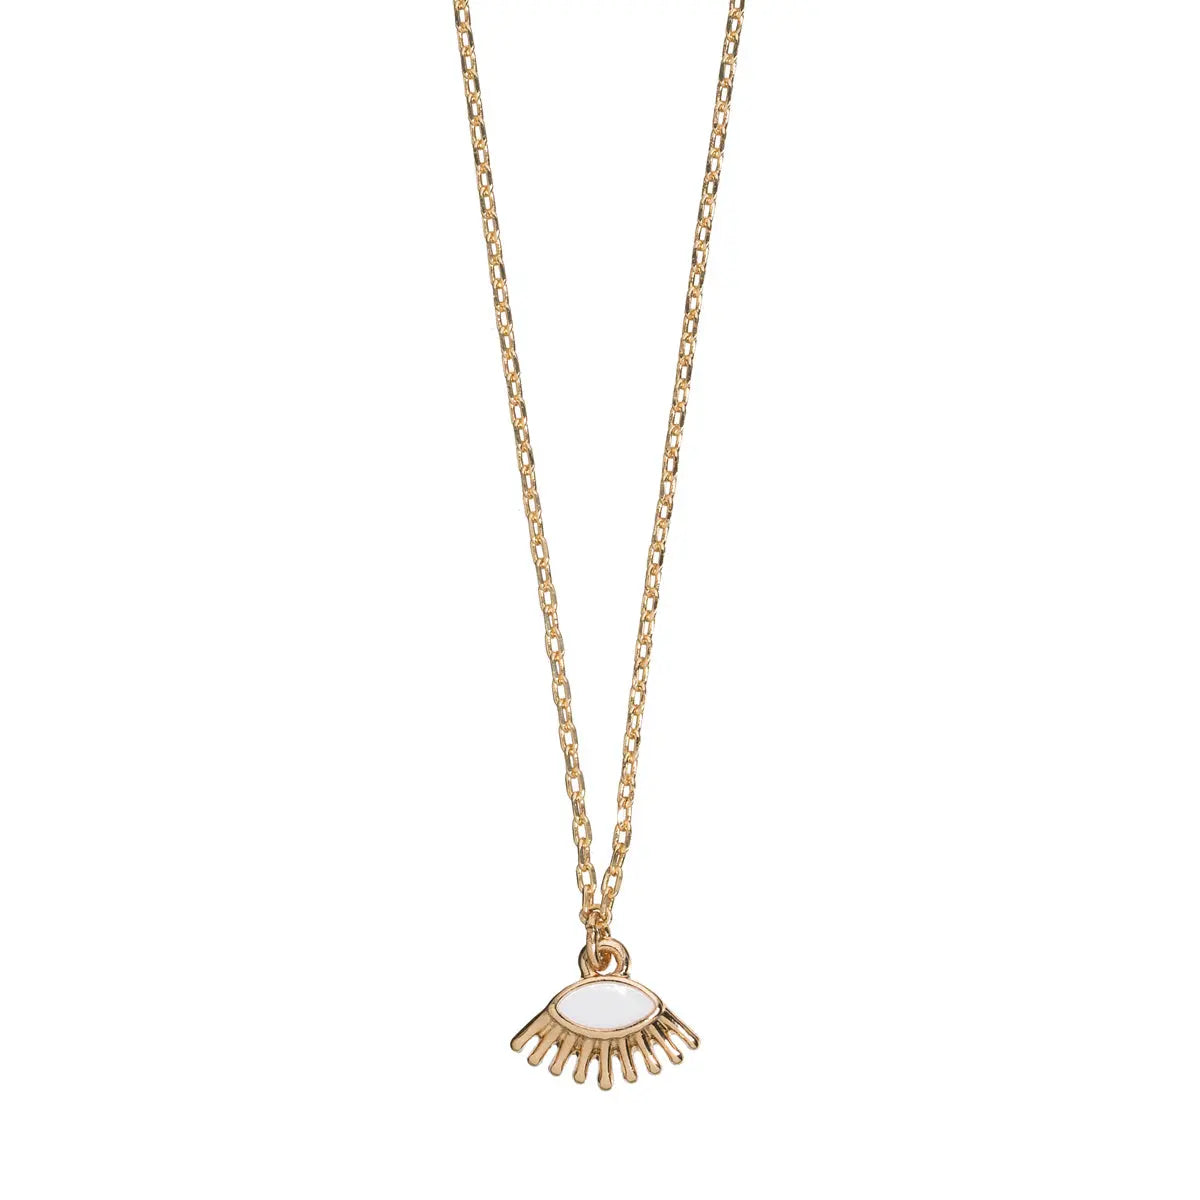 Eyes on me Necklace Gold